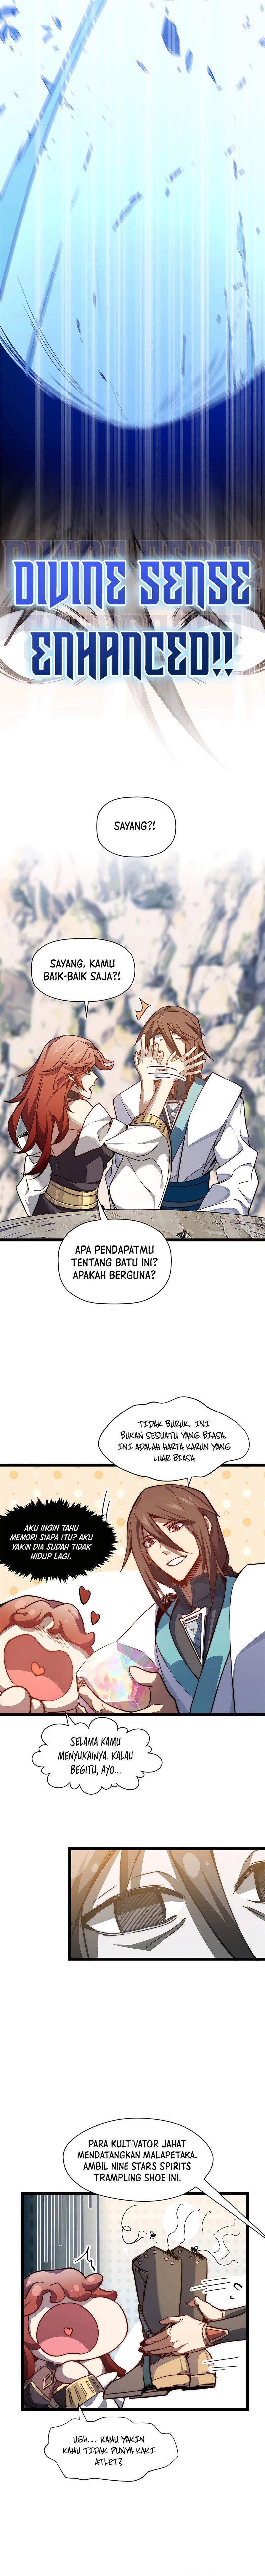 Dilarang COPAS - situs resmi www.mangacanblog.com - Komik top tier providence secretly cultivate for a thousand years 130 - chapter 130 131 Indonesia top tier providence secretly cultivate for a thousand years 130 - chapter 130 Terbaru 10|Baca Manga Komik Indonesia|Mangacan